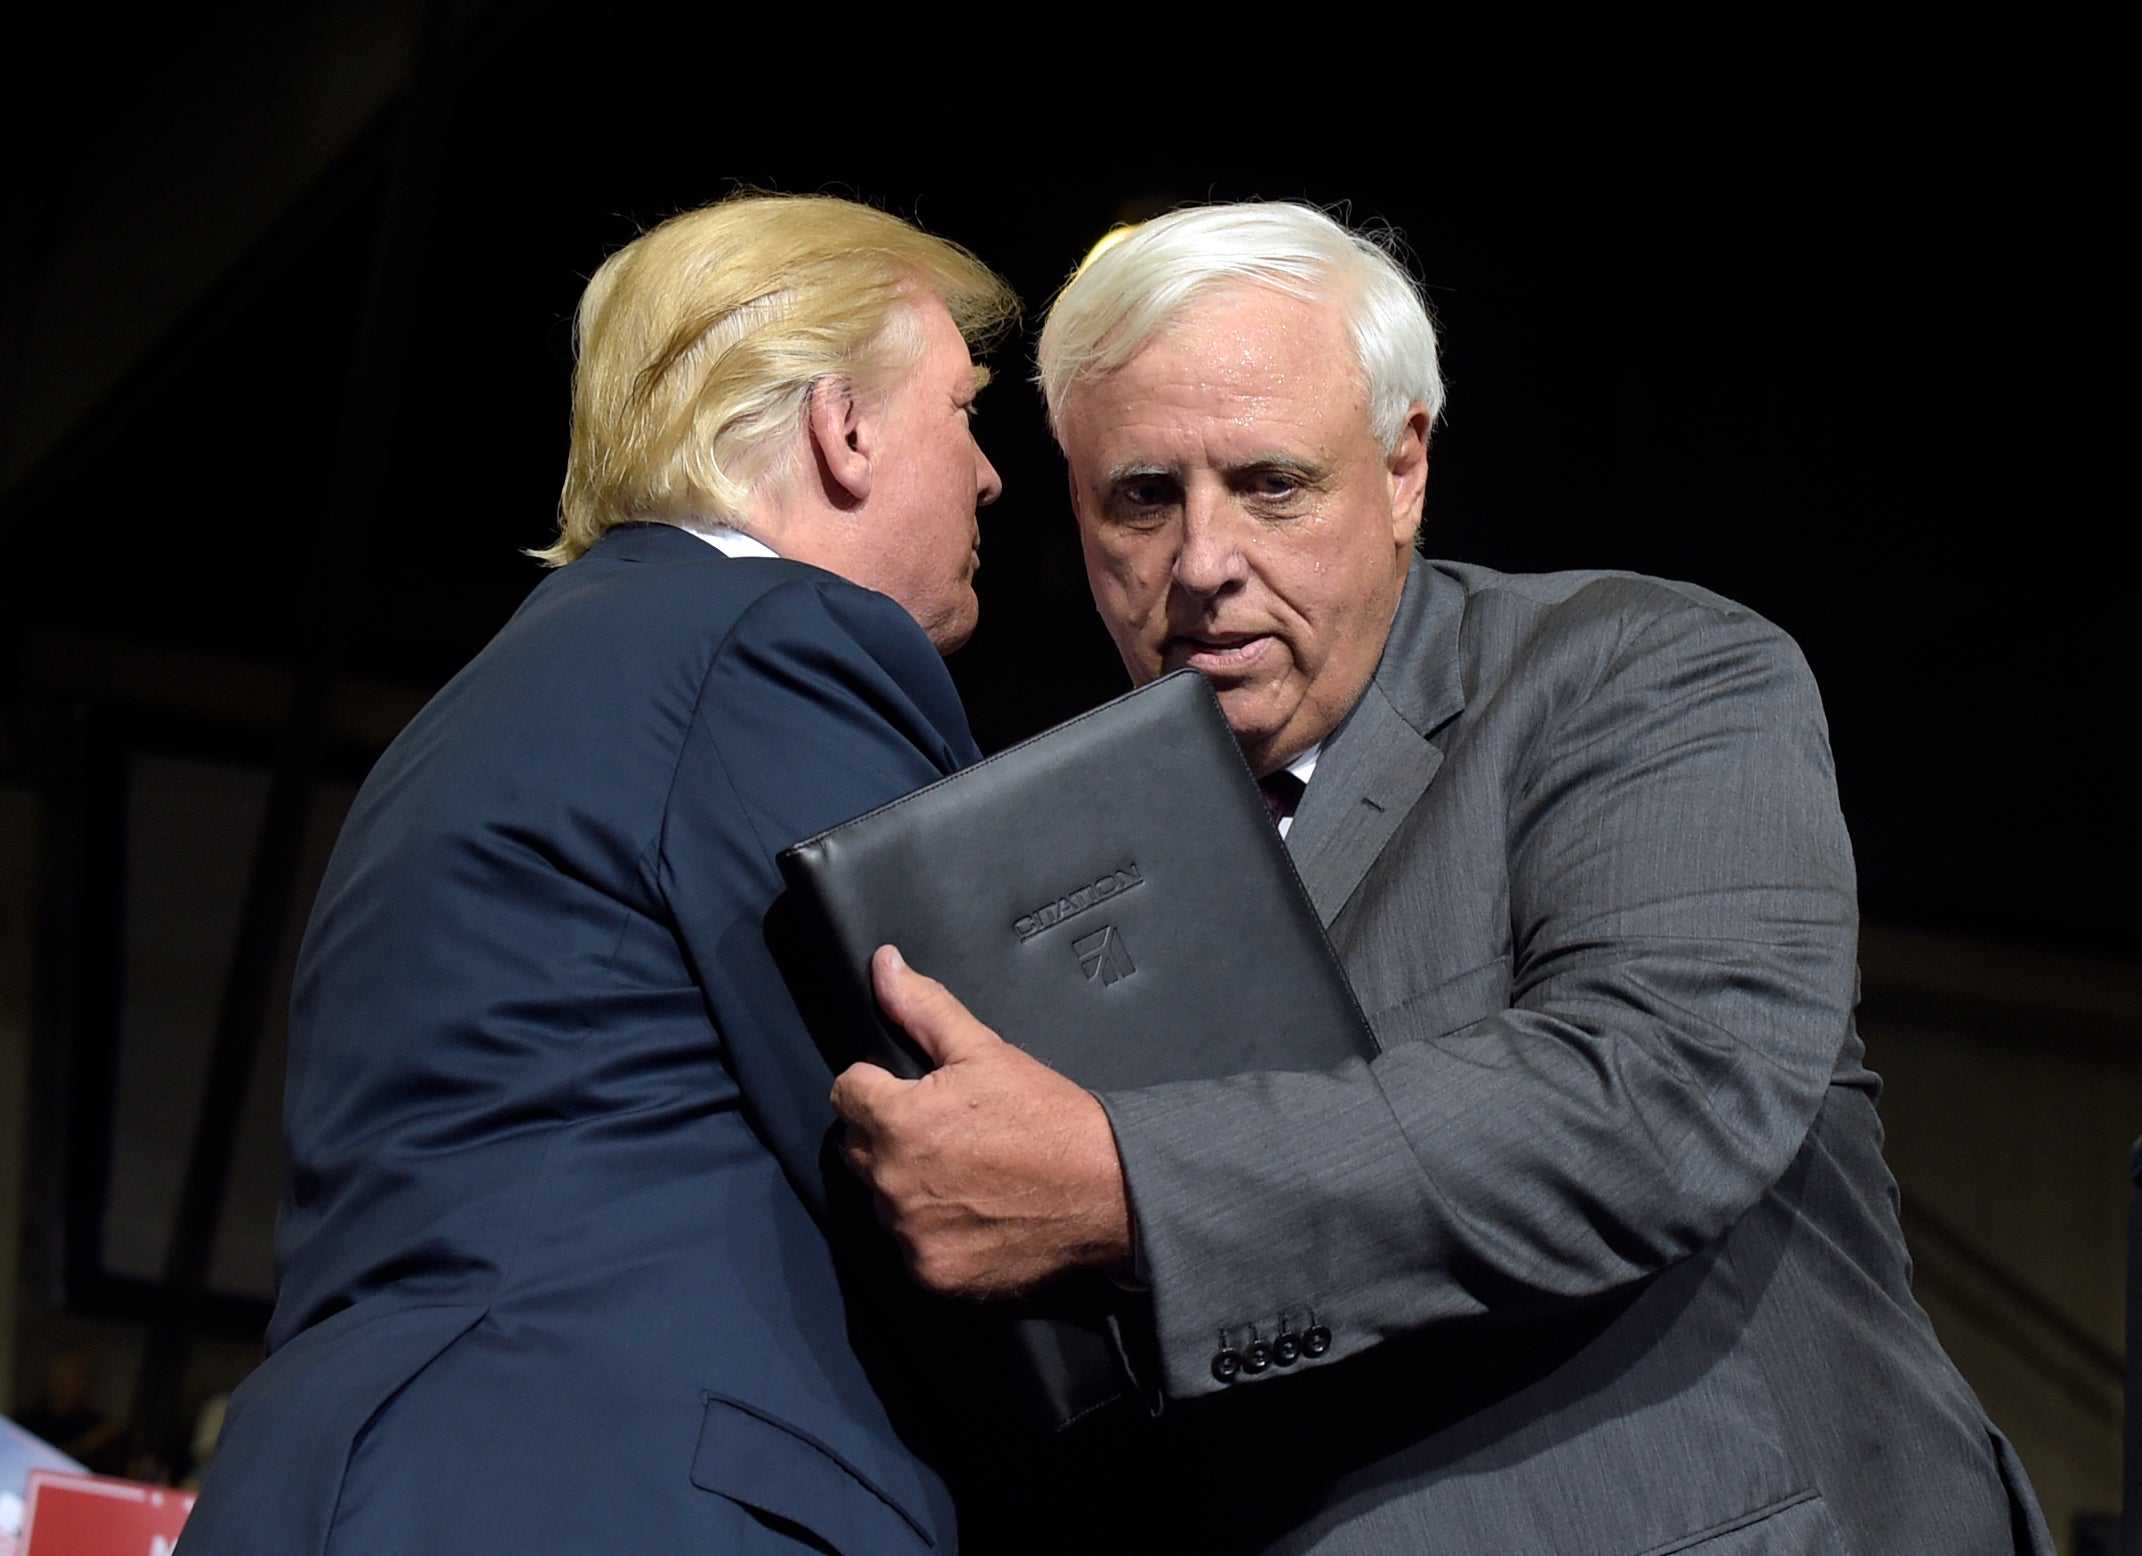 President Donald Trump embraces West Virginia Gov. Jim Justice after Justice announced during a rally that he was switching his registration to Republican.